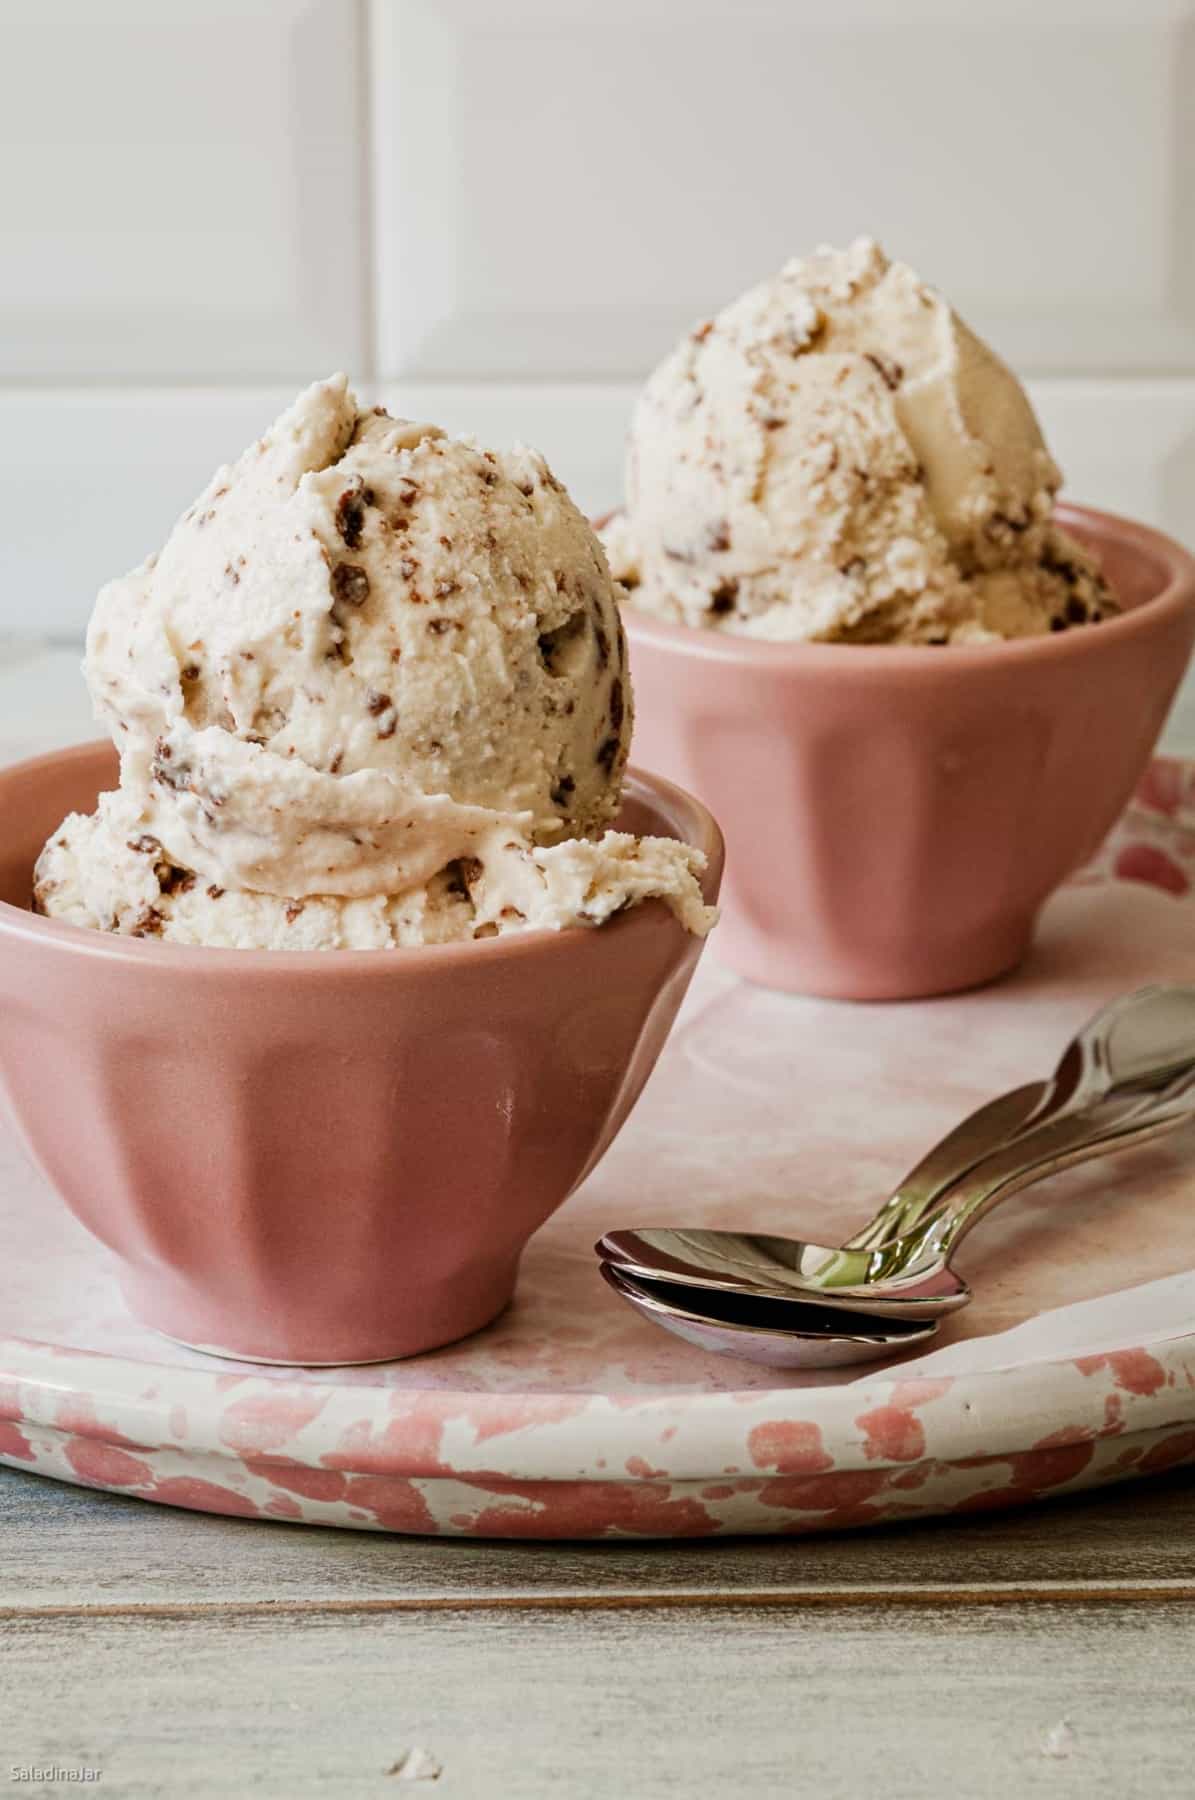 scoops of creme fraiche ice cream with Nutella flakes in pink bowls.